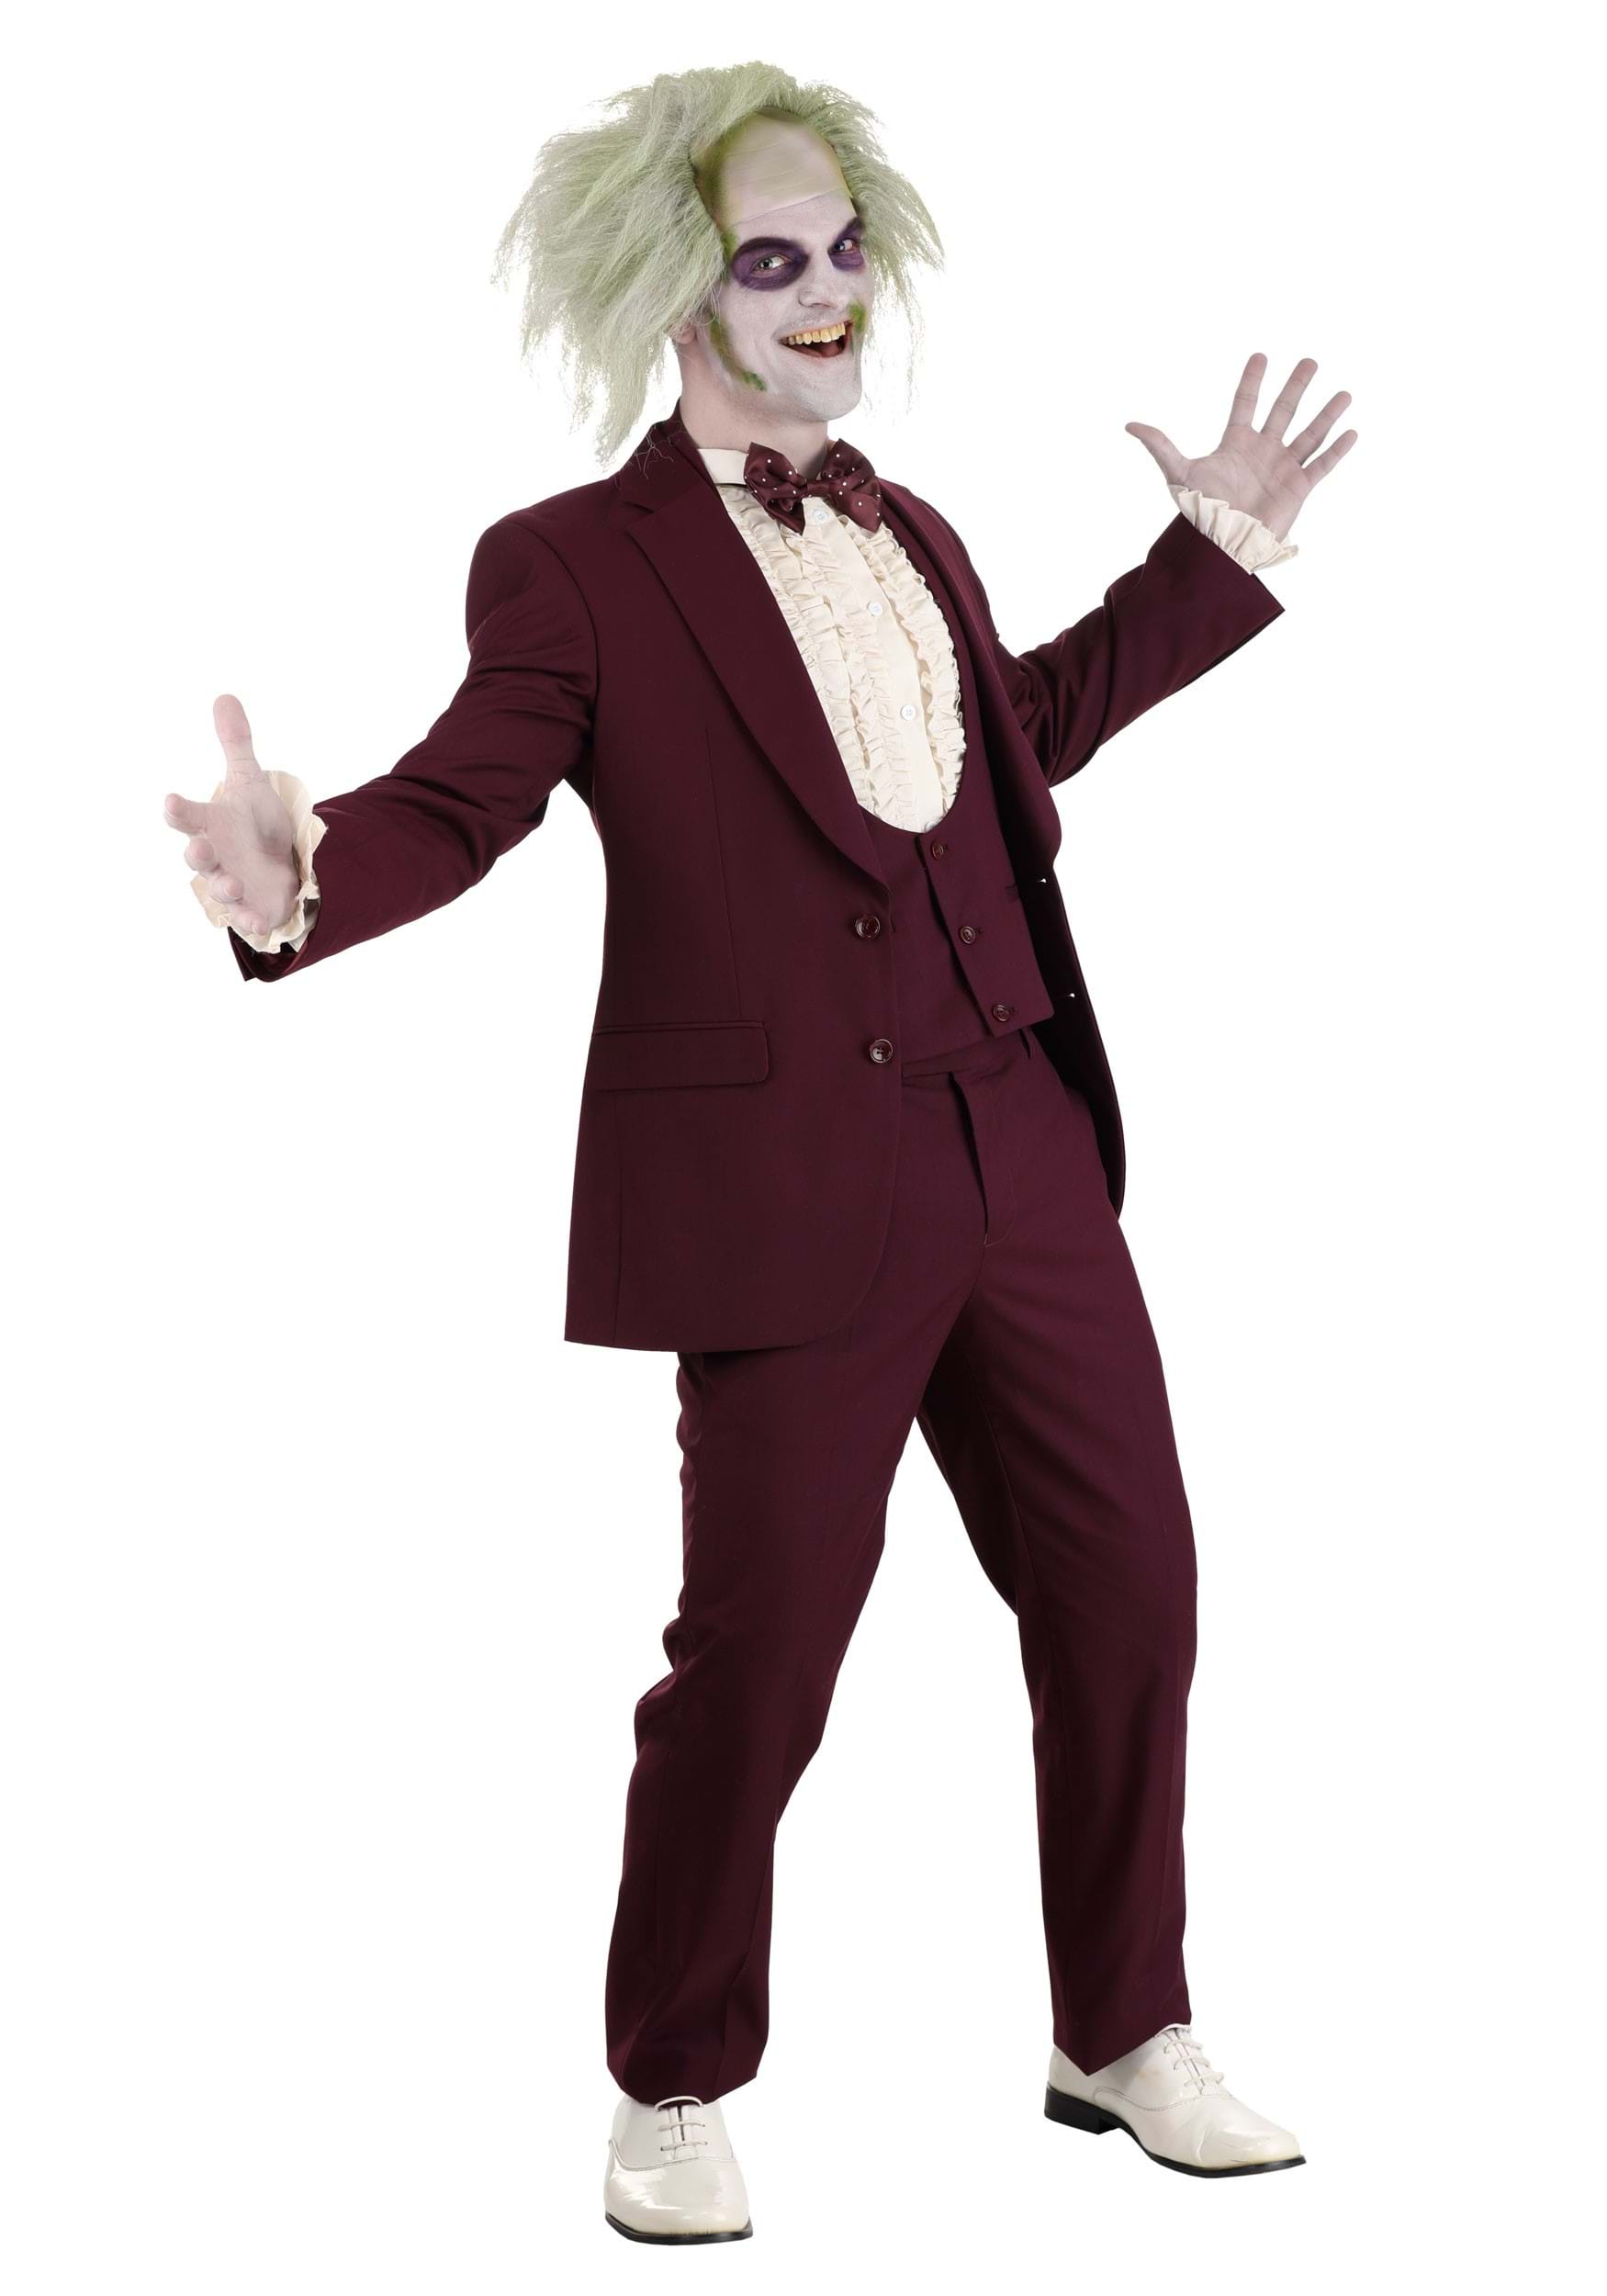 Beetlejuice Wedding Suit Shirt And Bow Tie Made For Men